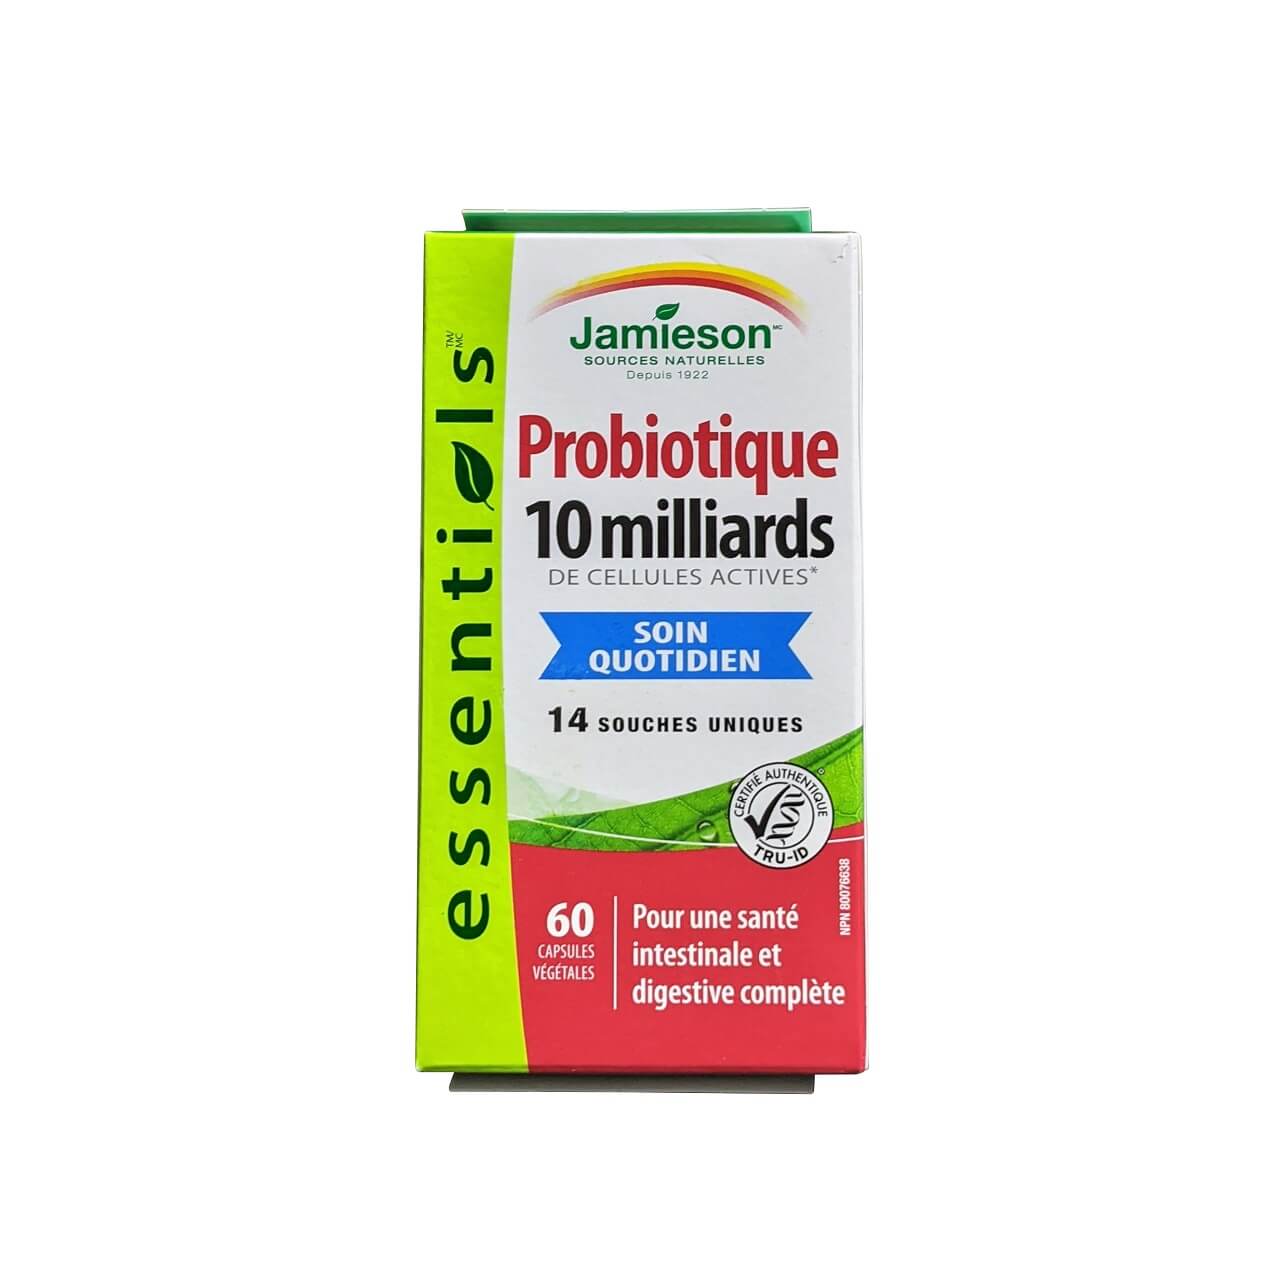 Product label for Jamieson Probiotic 10 Billion Daily Maintenance (60 capsules) in French